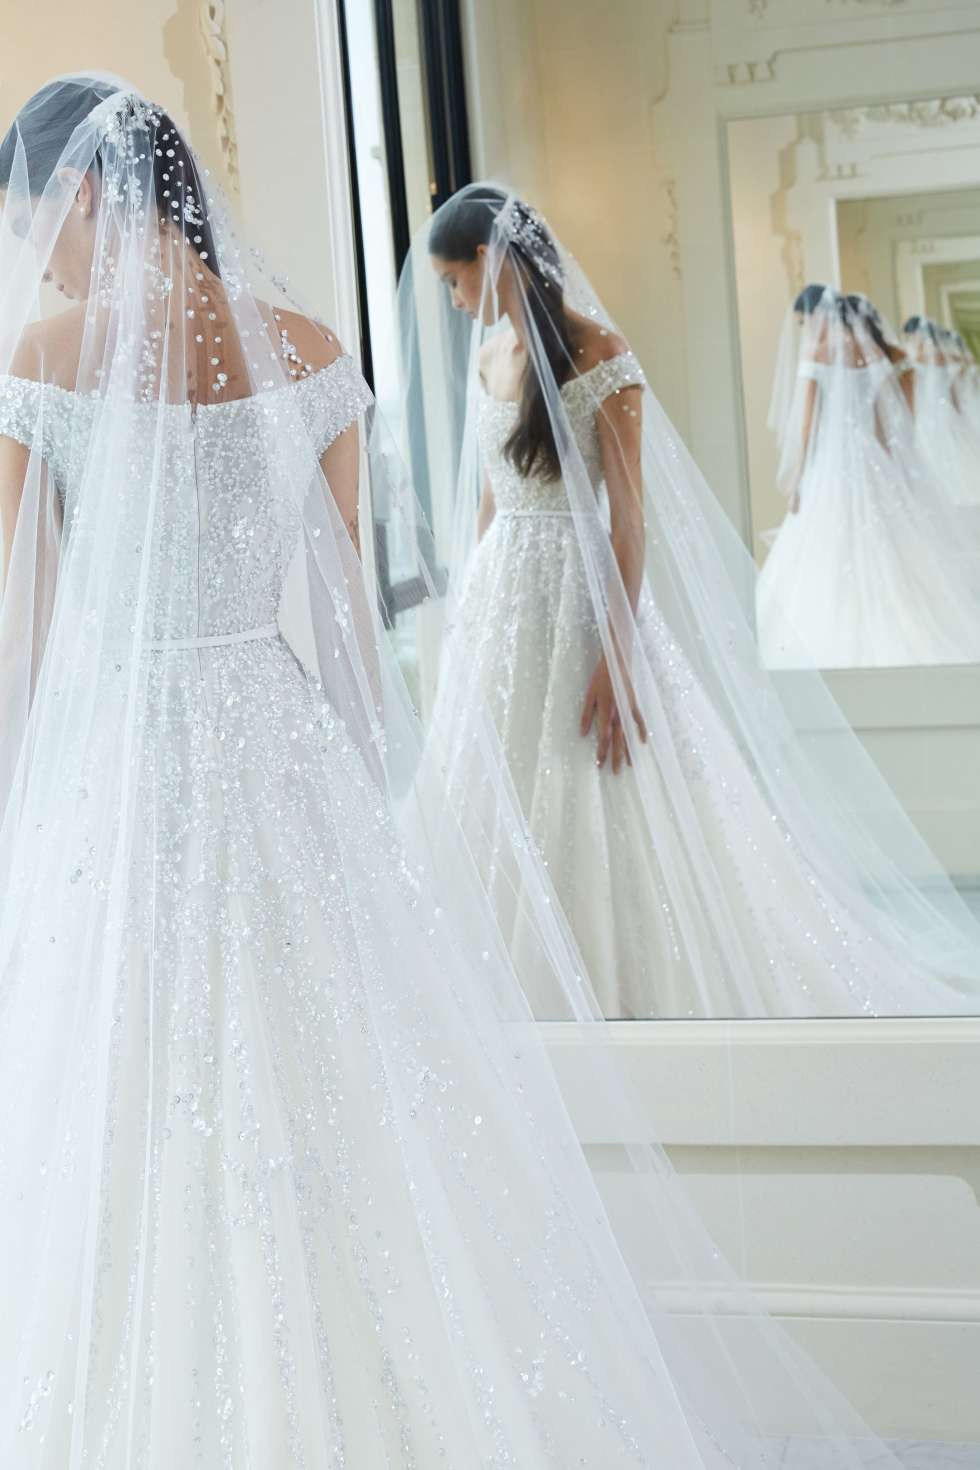 The Fall 2019 Wedding Dress Collection by Elie Saab